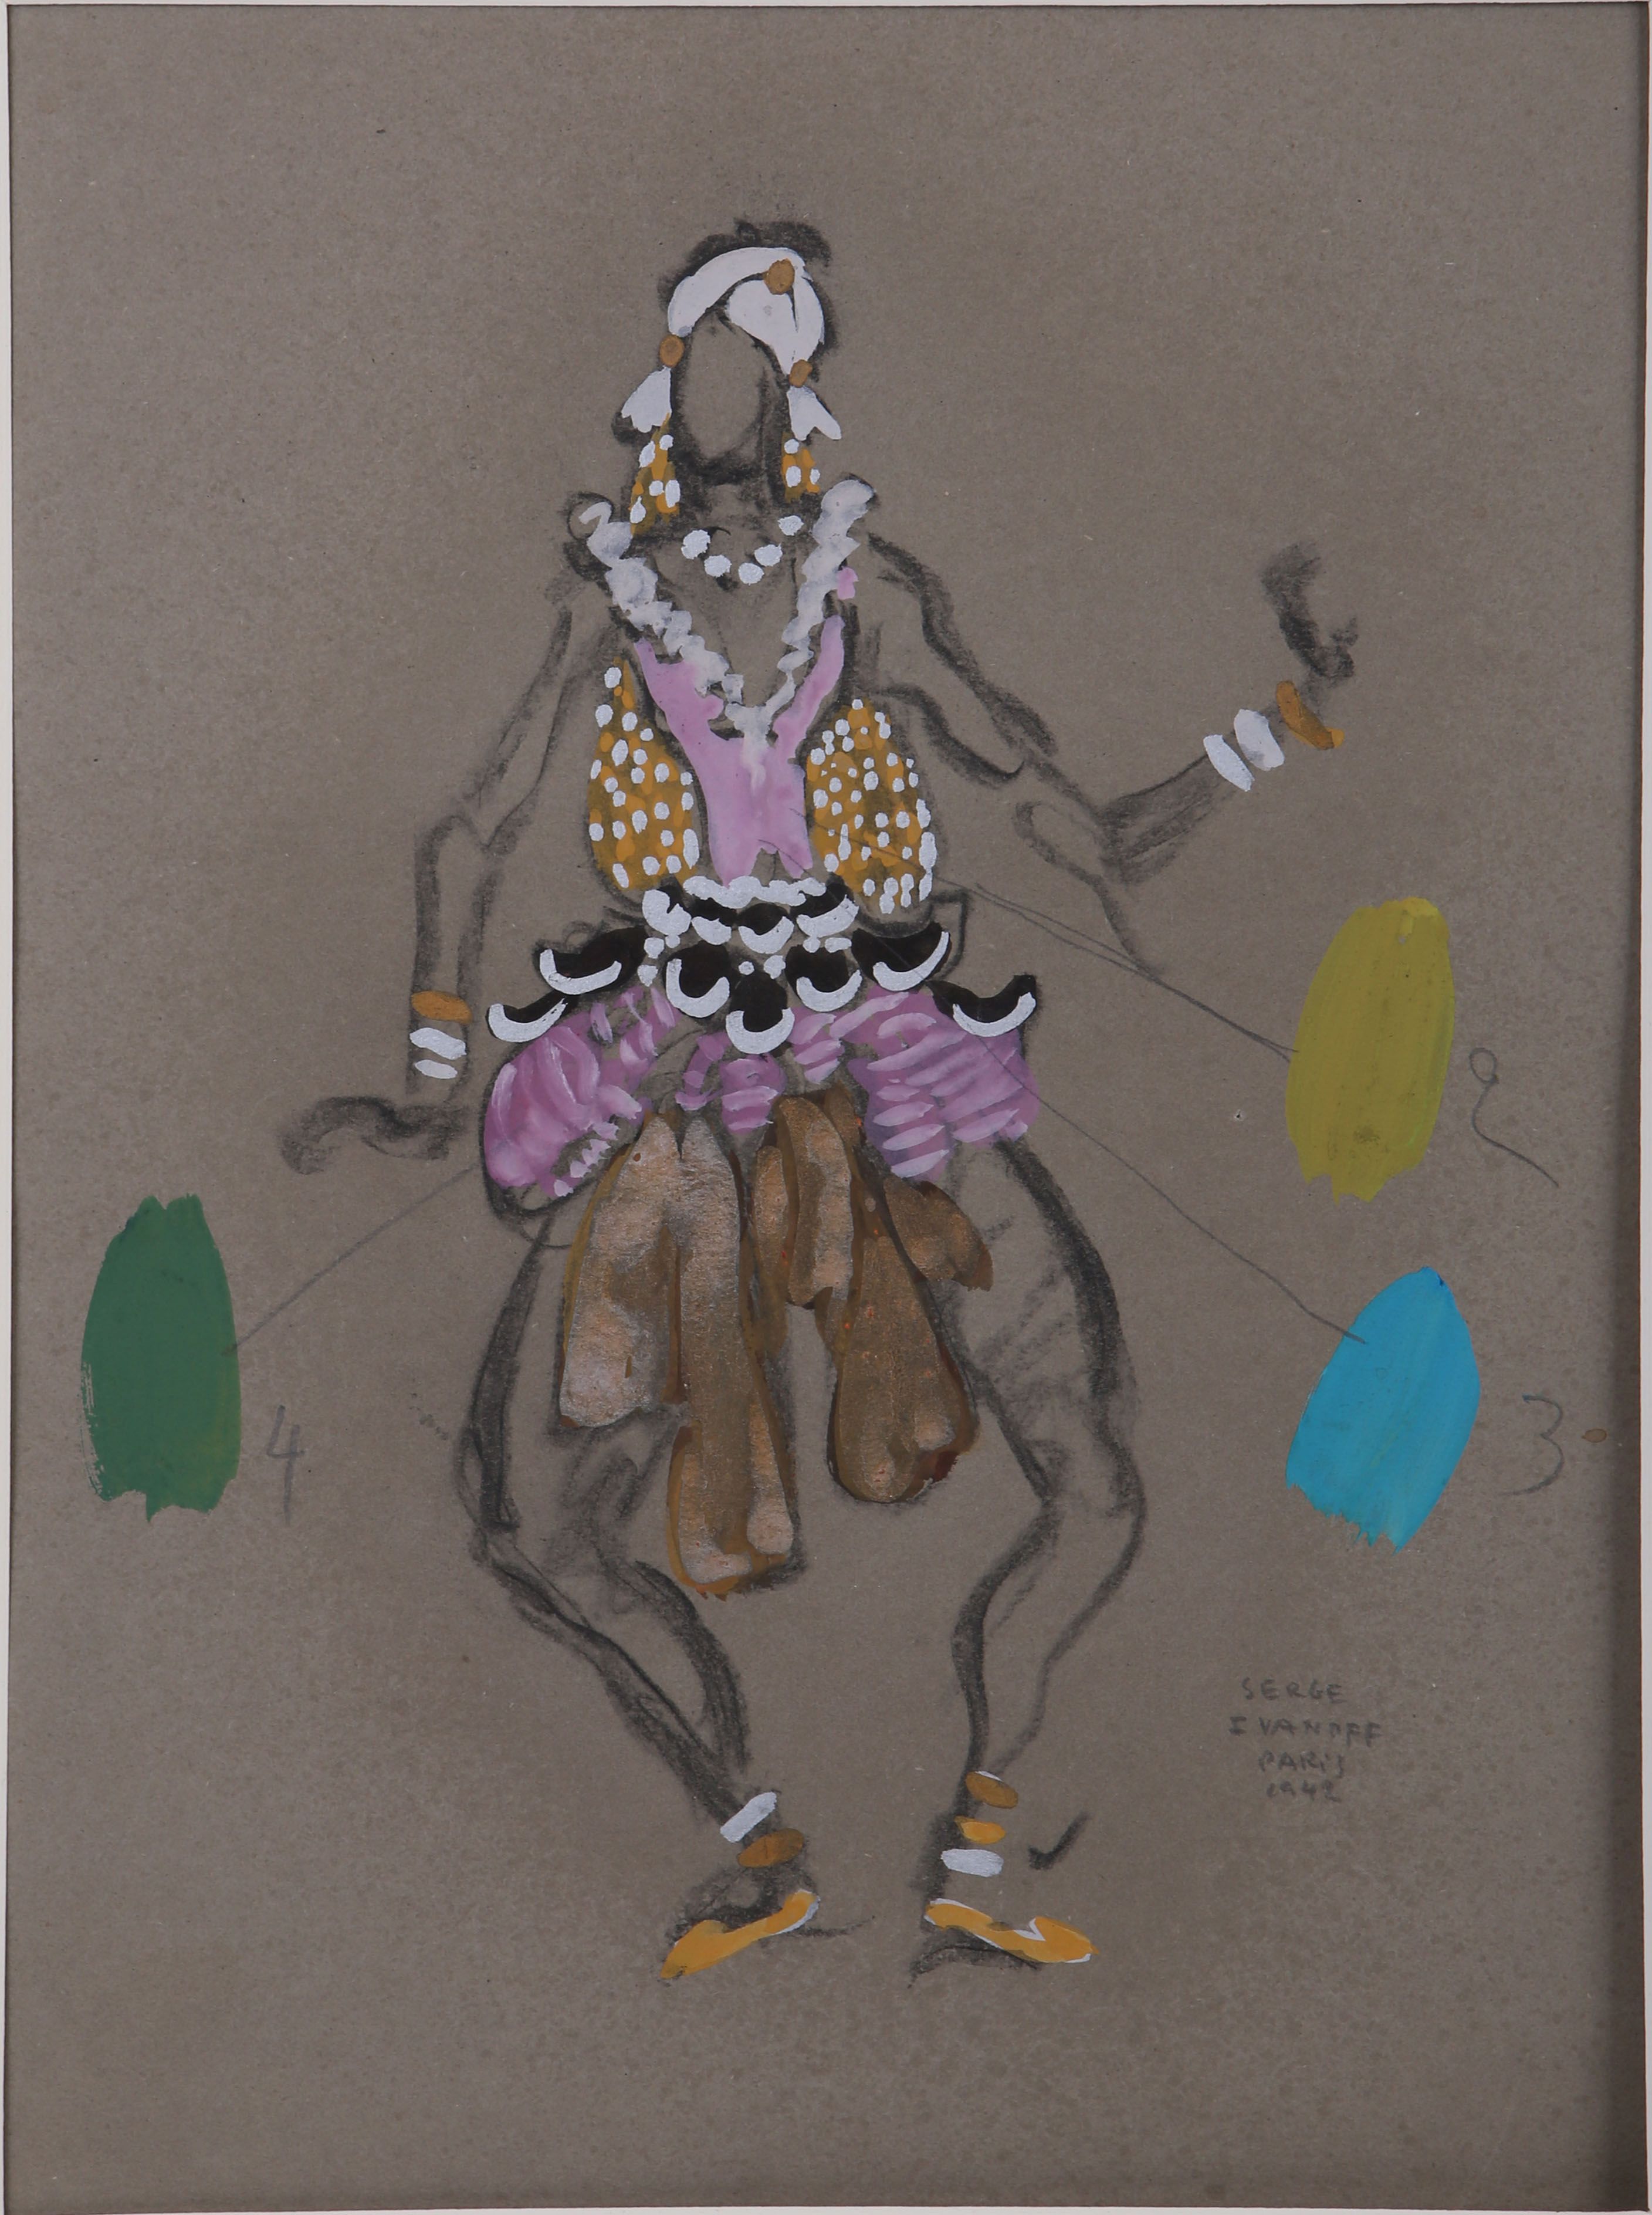 Serge Ivanoff (1893-1983, Russian), 'Costume Design for Prince and Dancer', gouache on grey board, - Image 2 of 6